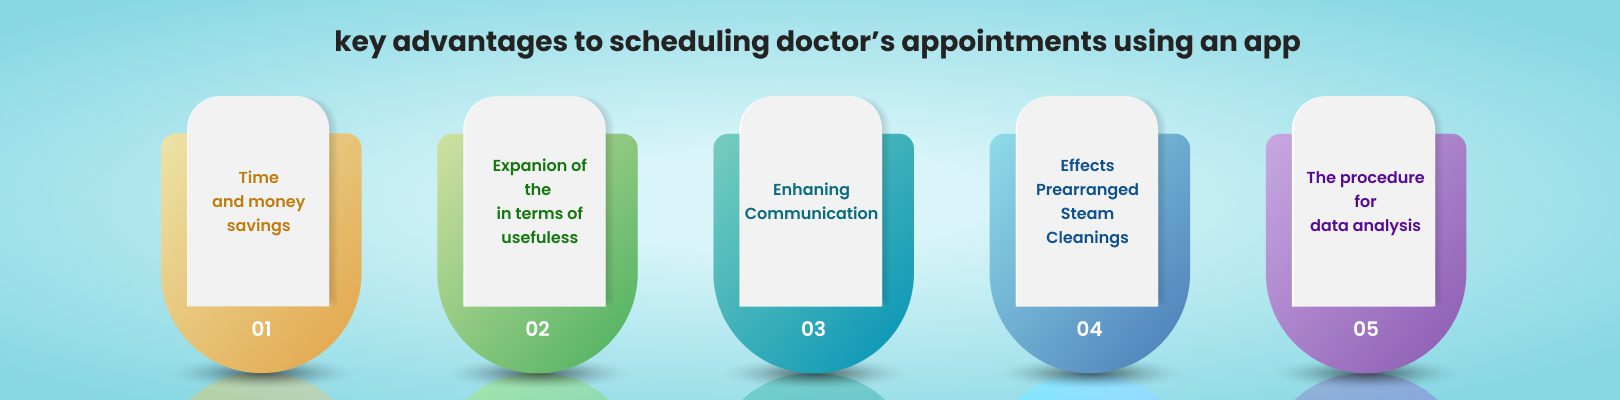 key advantages to scheduling doctor’s appointments using an app